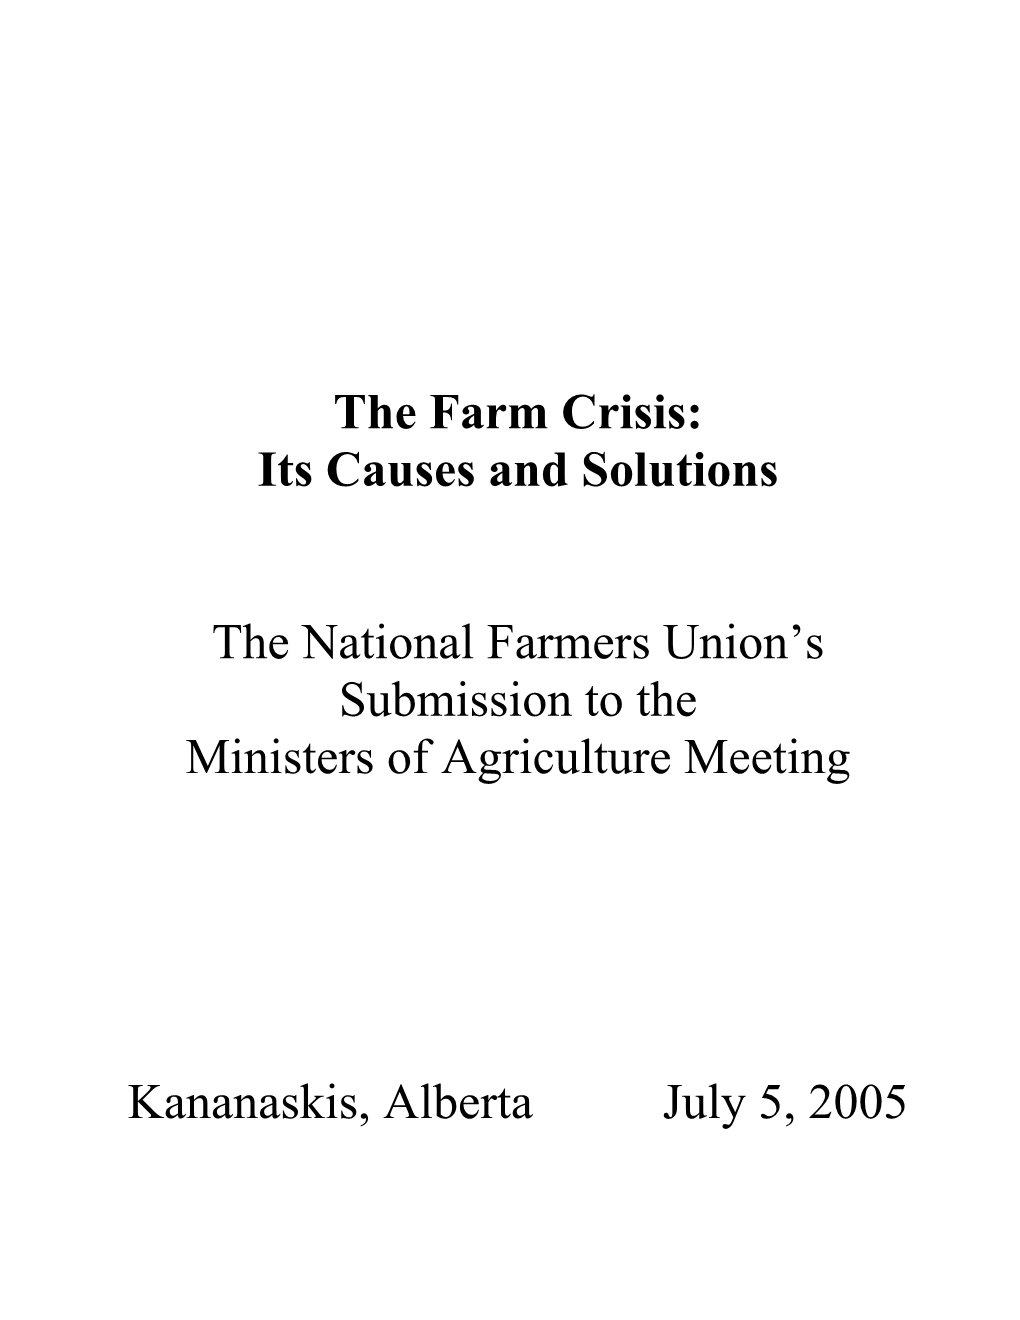 The Farm Crisis: Its Causes and Solutions